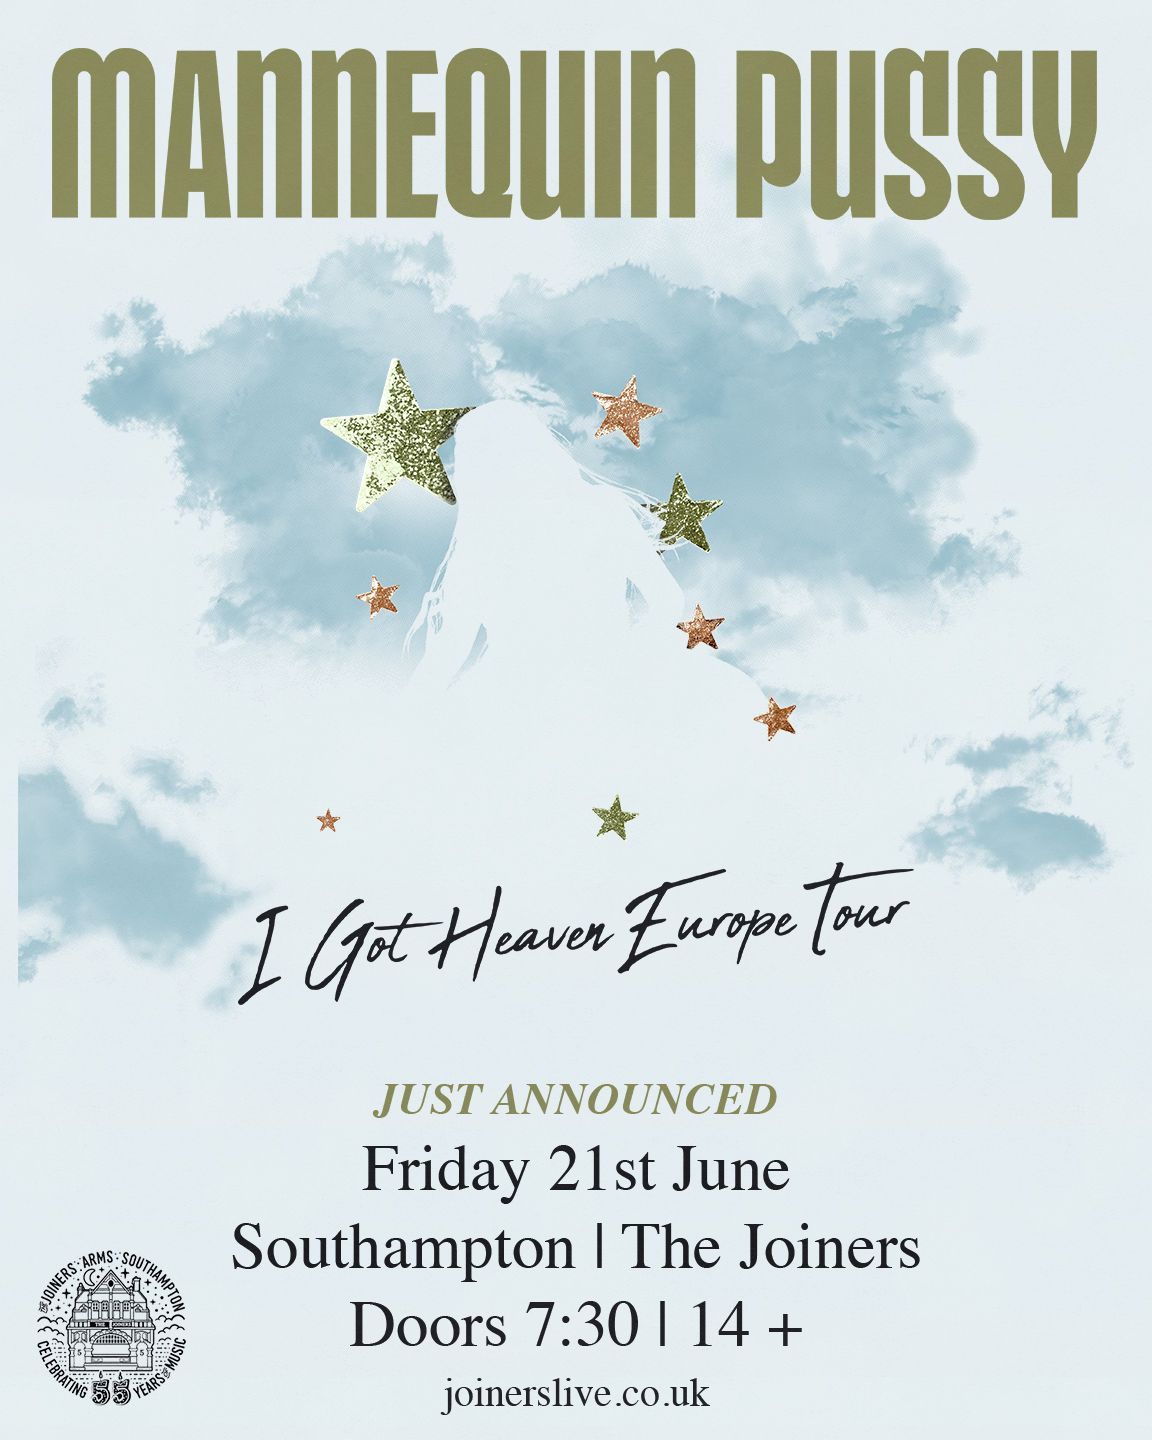 Mannequin Pussy + TTSSFU at The Joiners, Southampton - SOLD OUT!